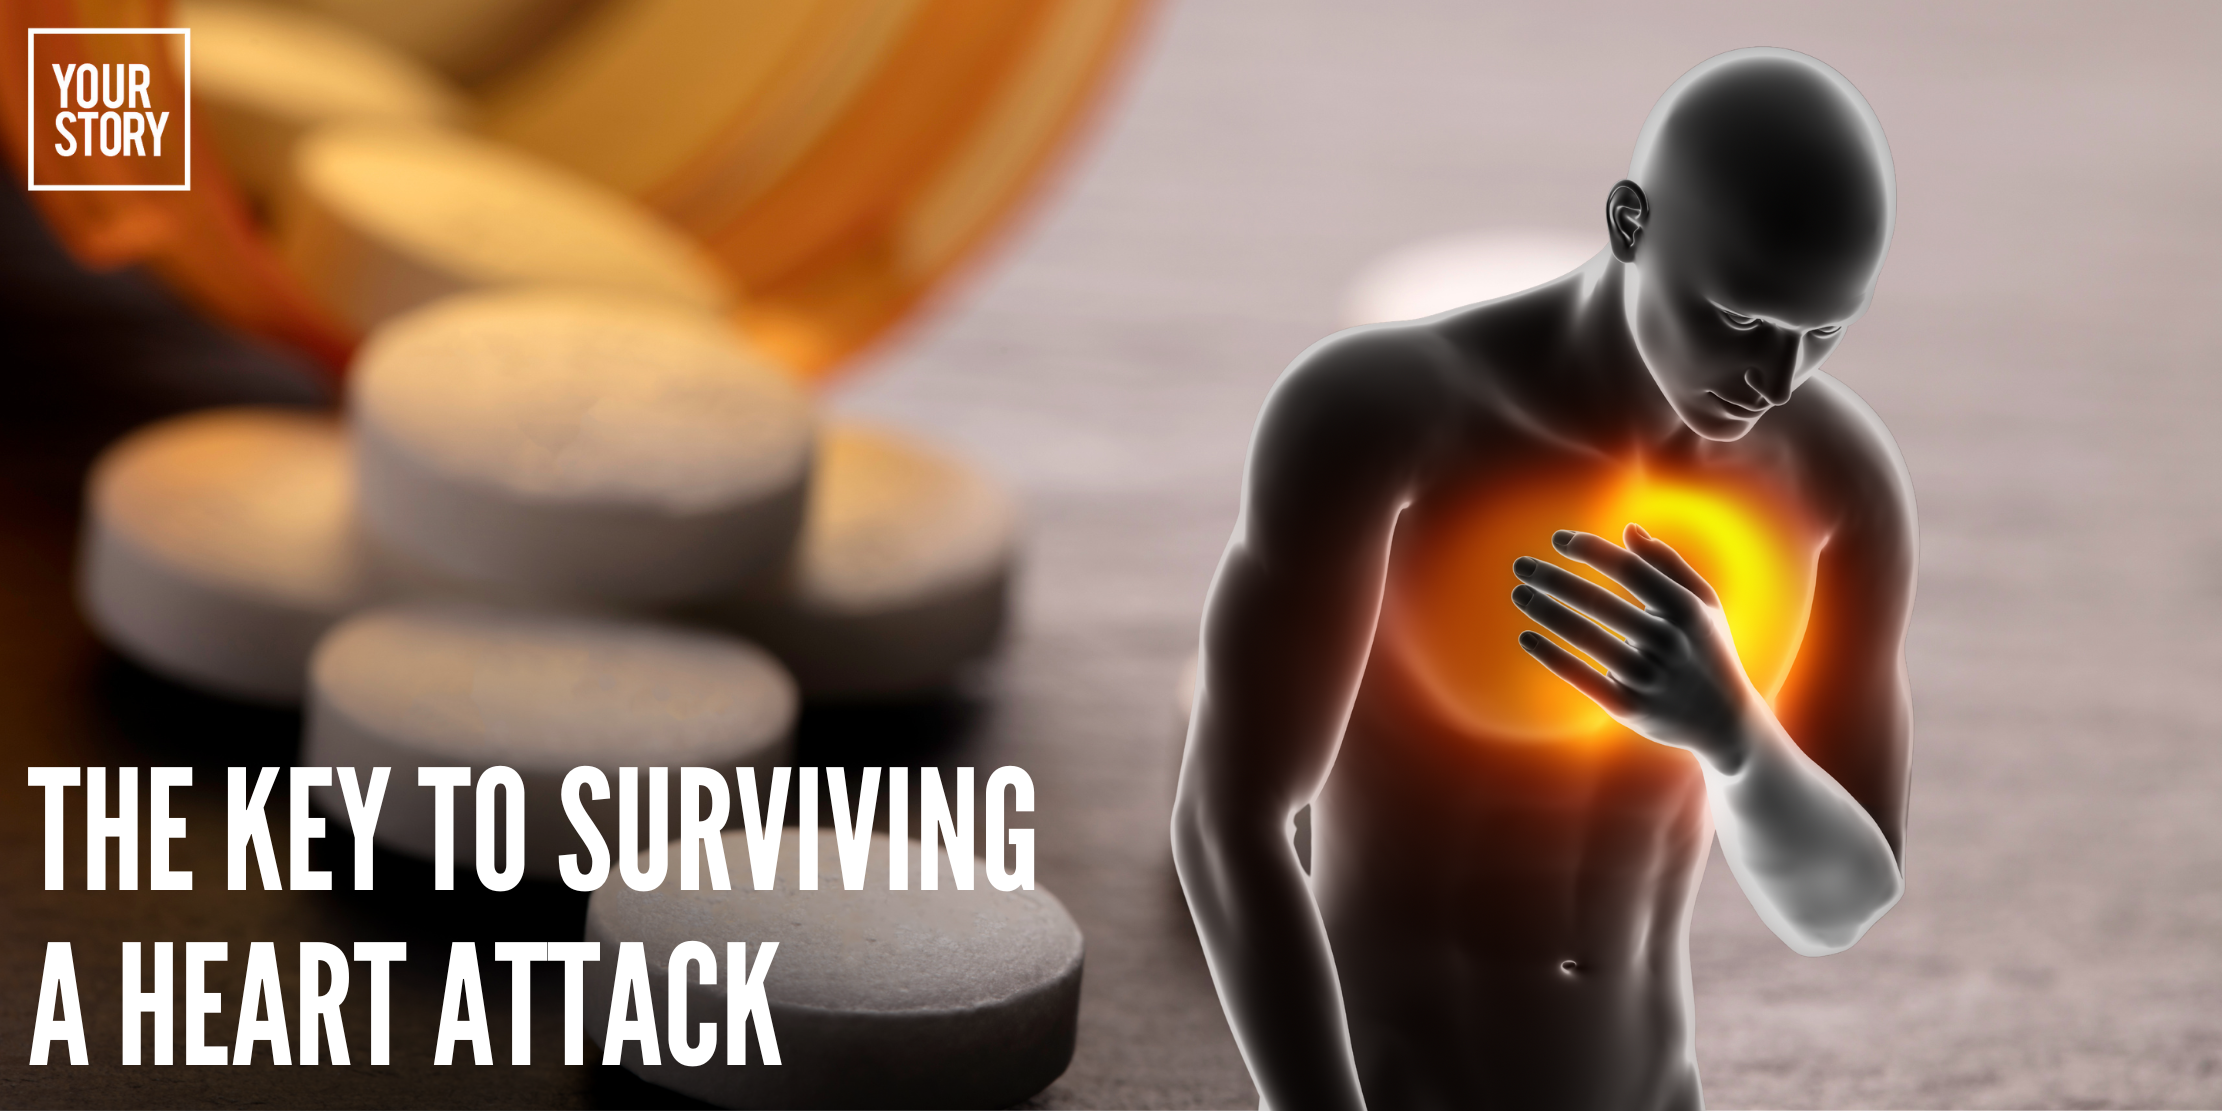 ⁠⁠This Common Pain Reliever Could Be the Key to Surviving a Heart Attack